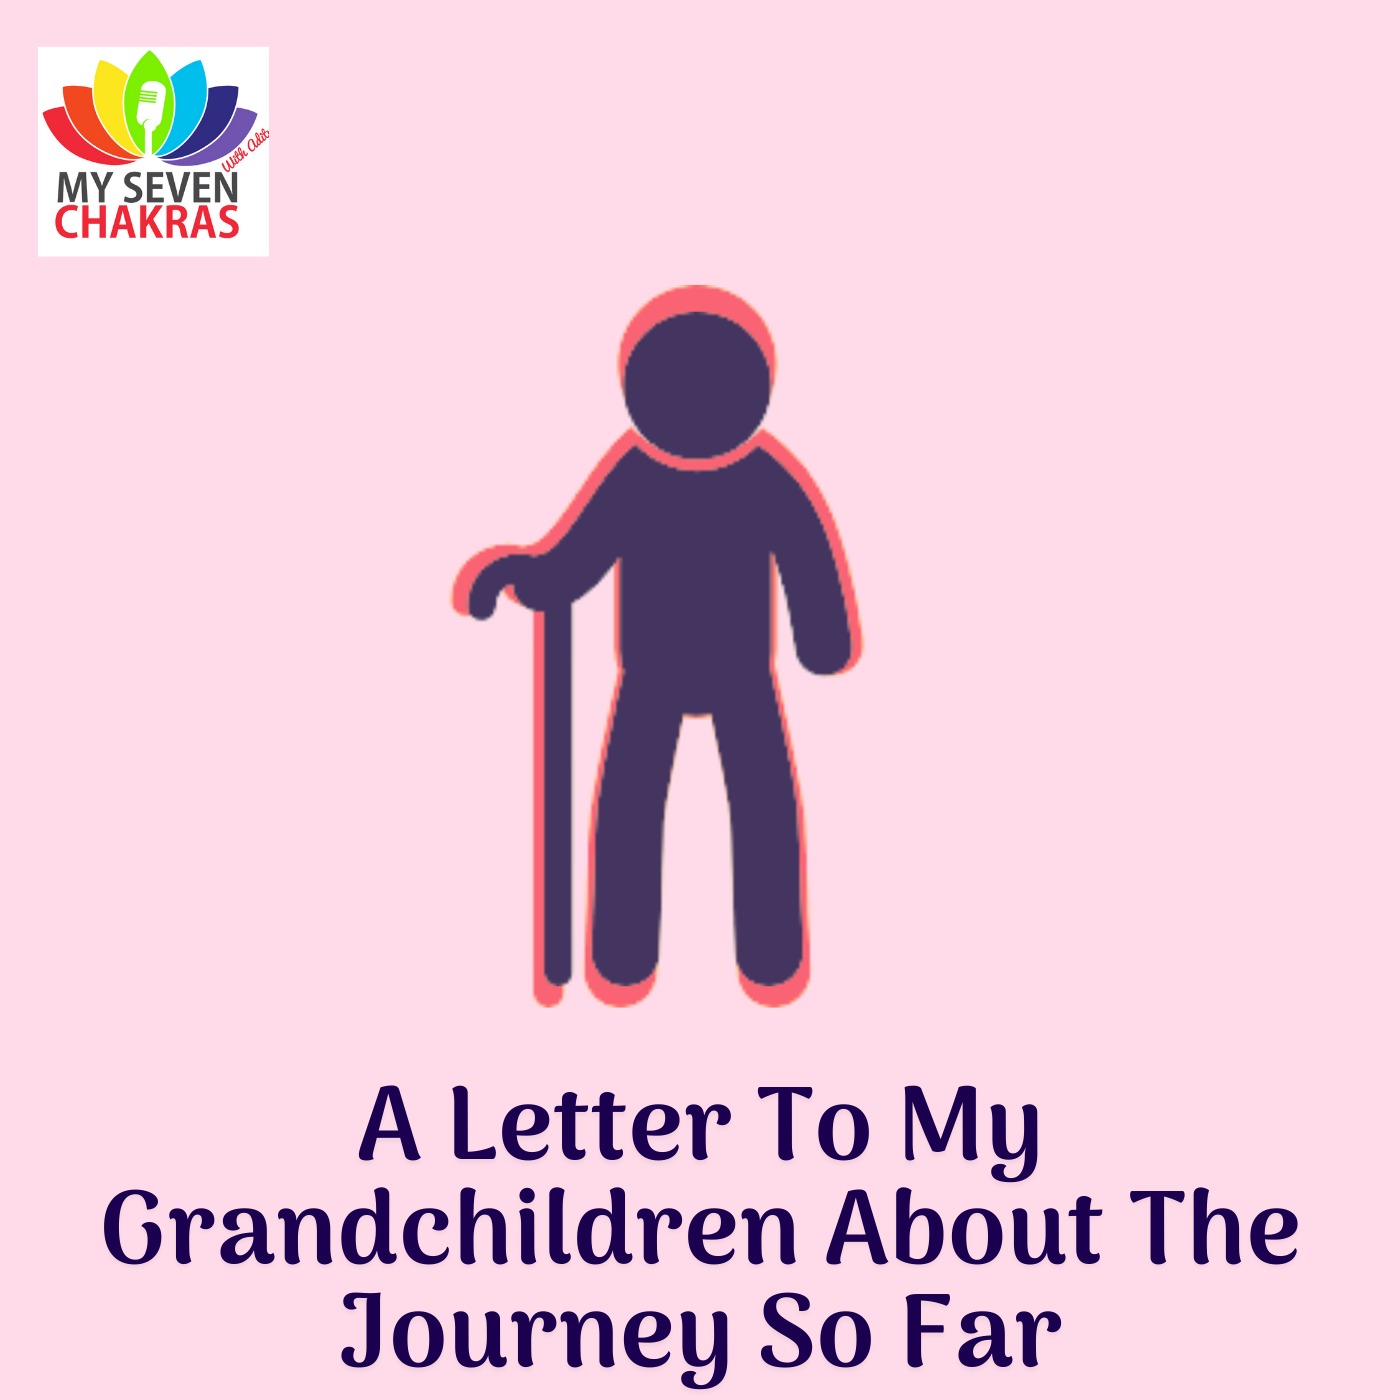 A Letter To My Grandchildren About The Journey So Far